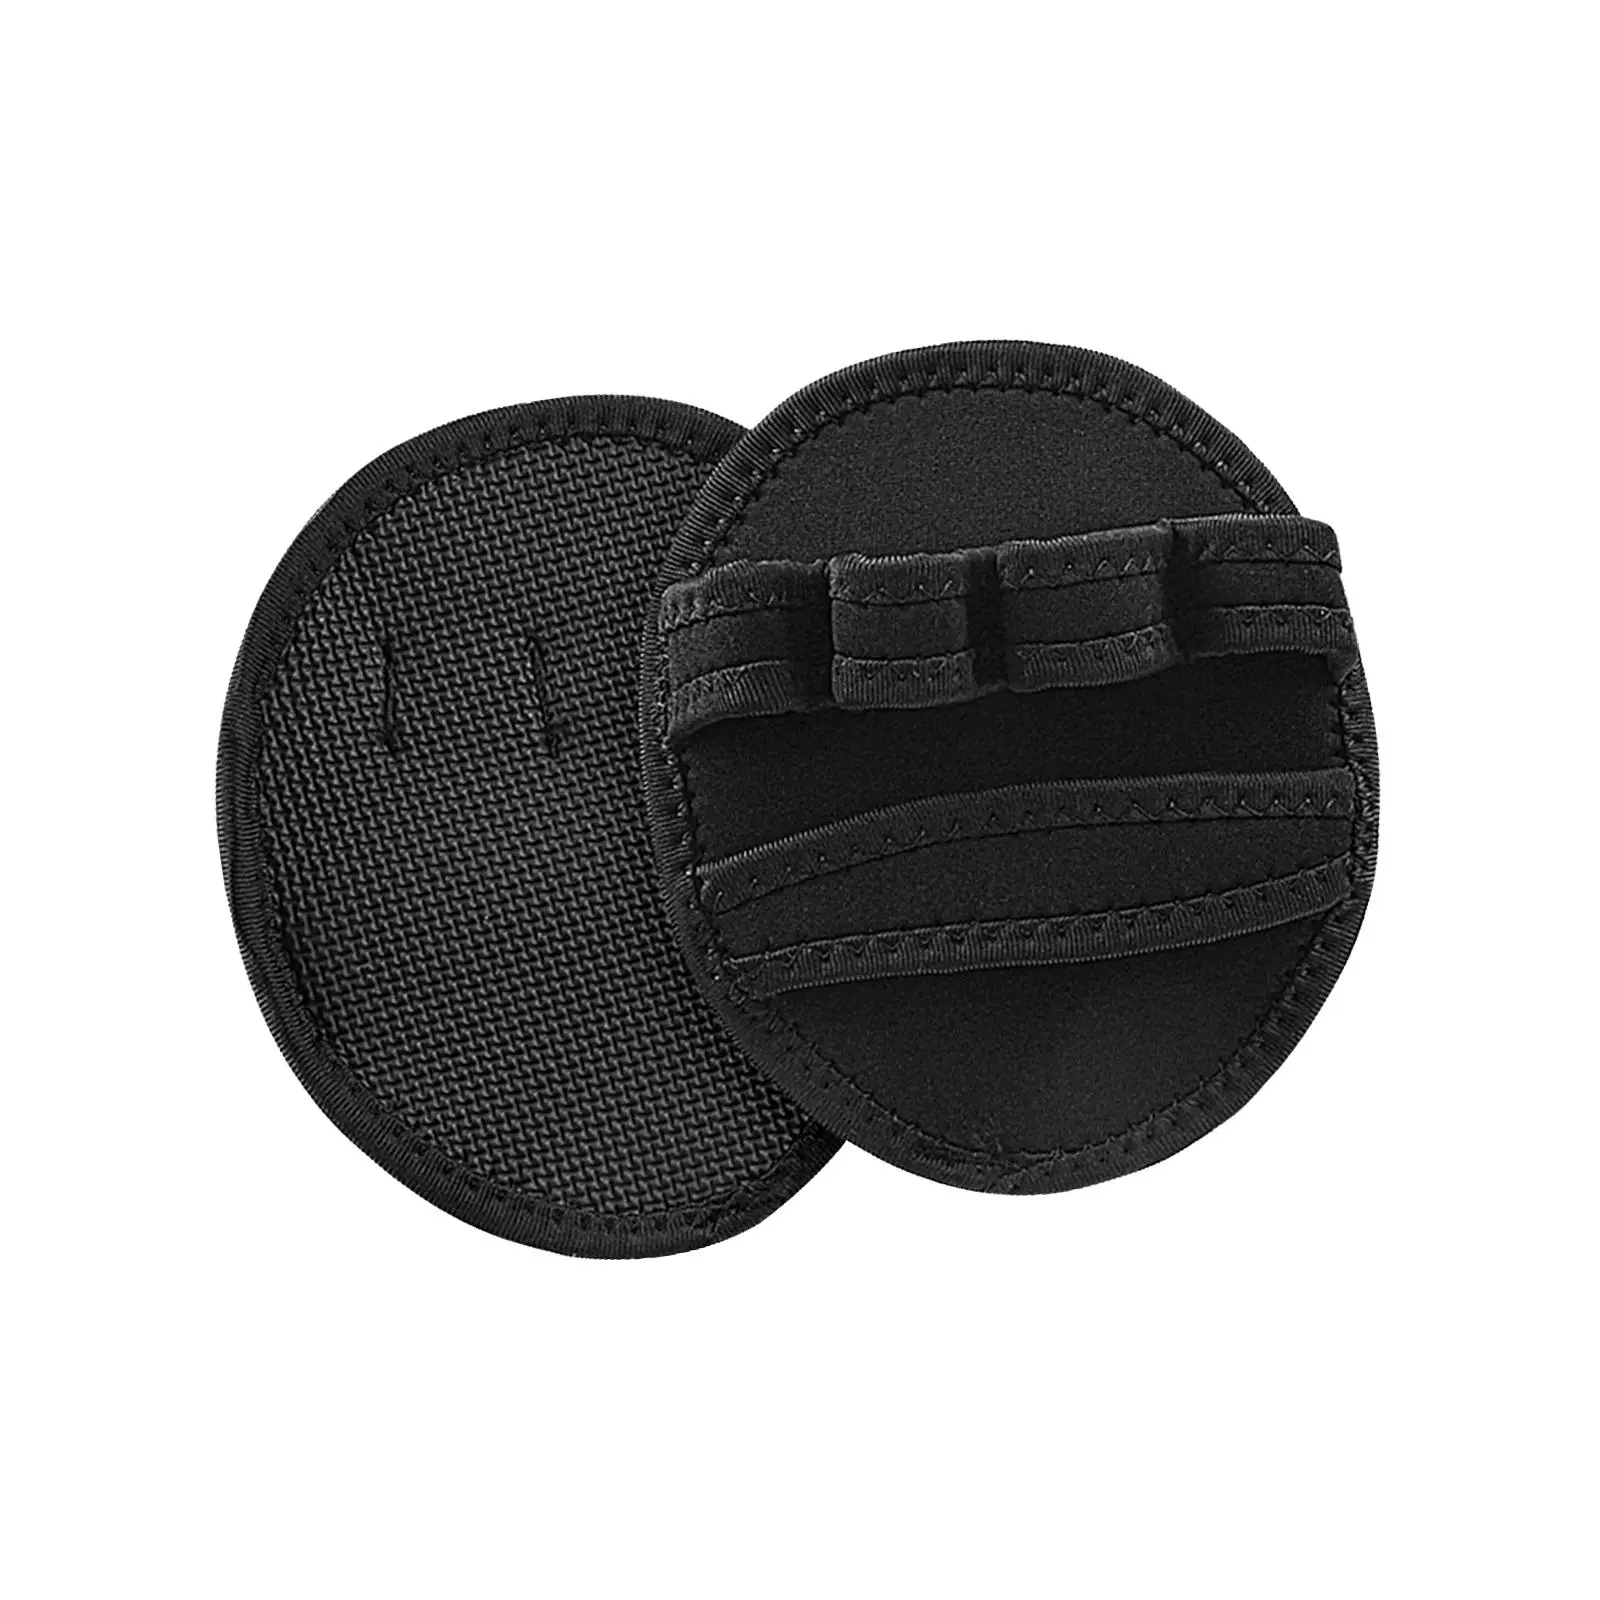 Lifting Pads for Weightlifting Unisex Workout Gloves for Sports Calisthenics